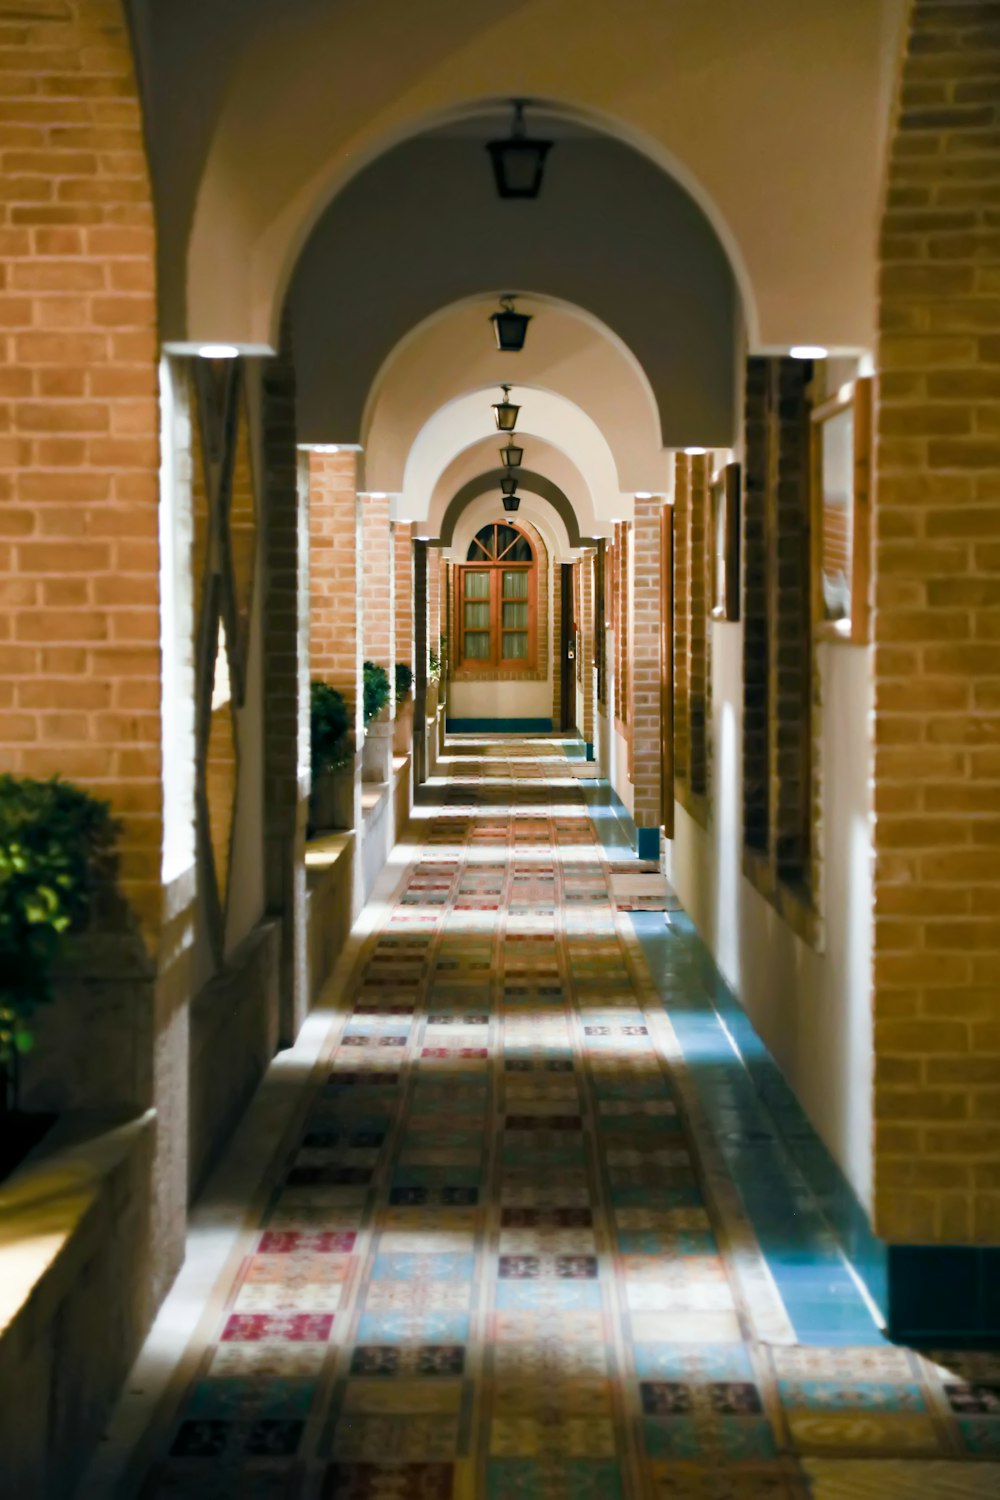 a long hallway with tiled floors and arches